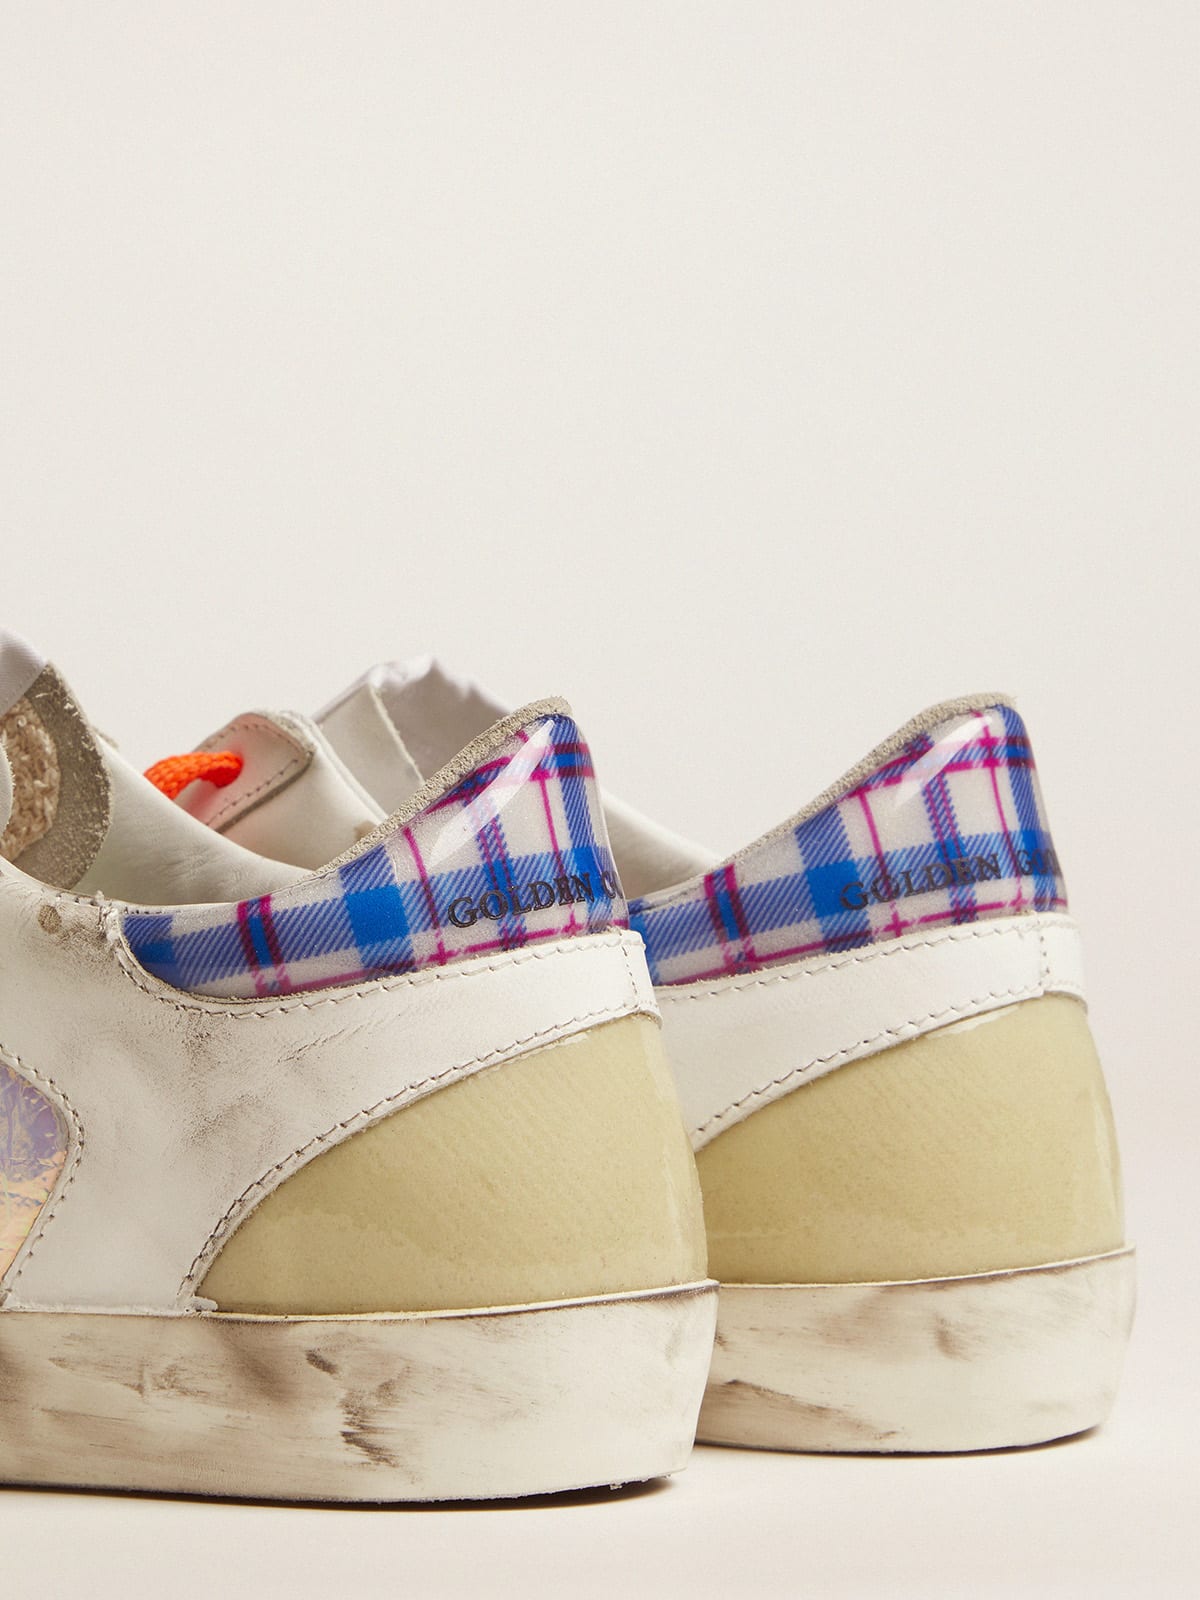 Golden Goose - Women's Limited Edition LAB Super-Star sneakers with holographic and tartan upper in 